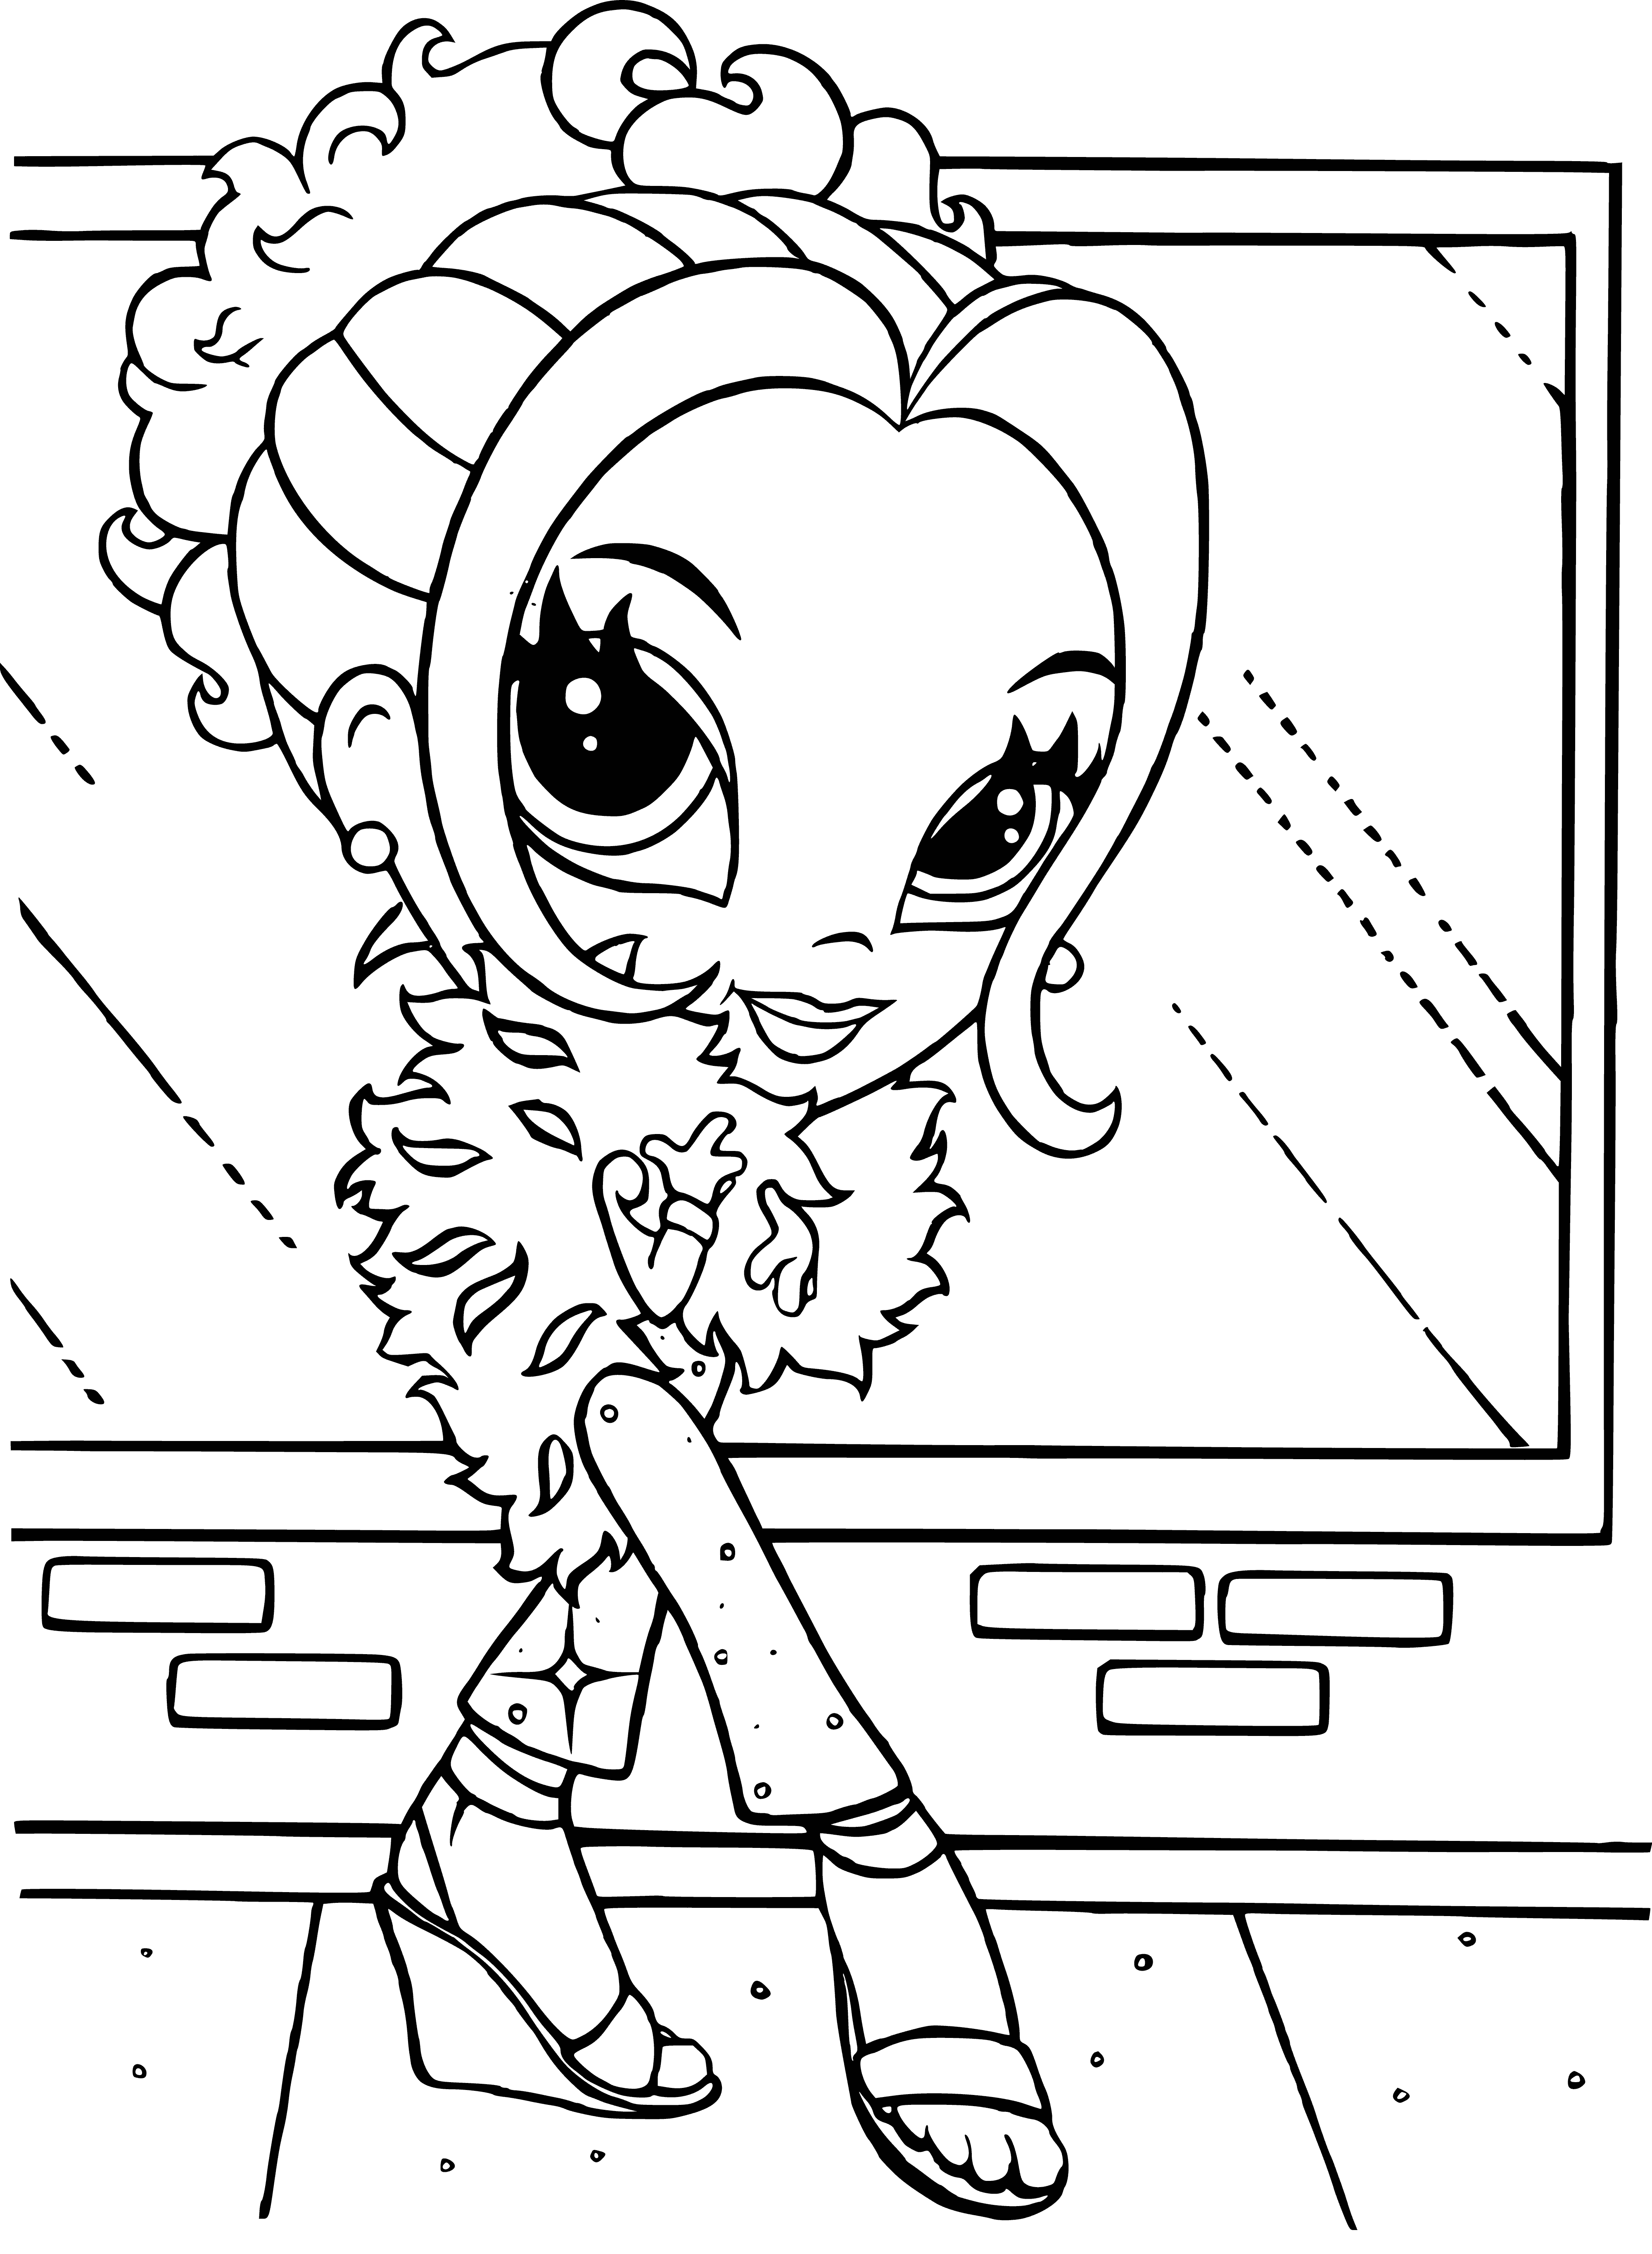 coloring page: Glam girl with long hair wearing pink dress, pink bow and holding flower, the Lisa Frank Glamour Girl. #girly